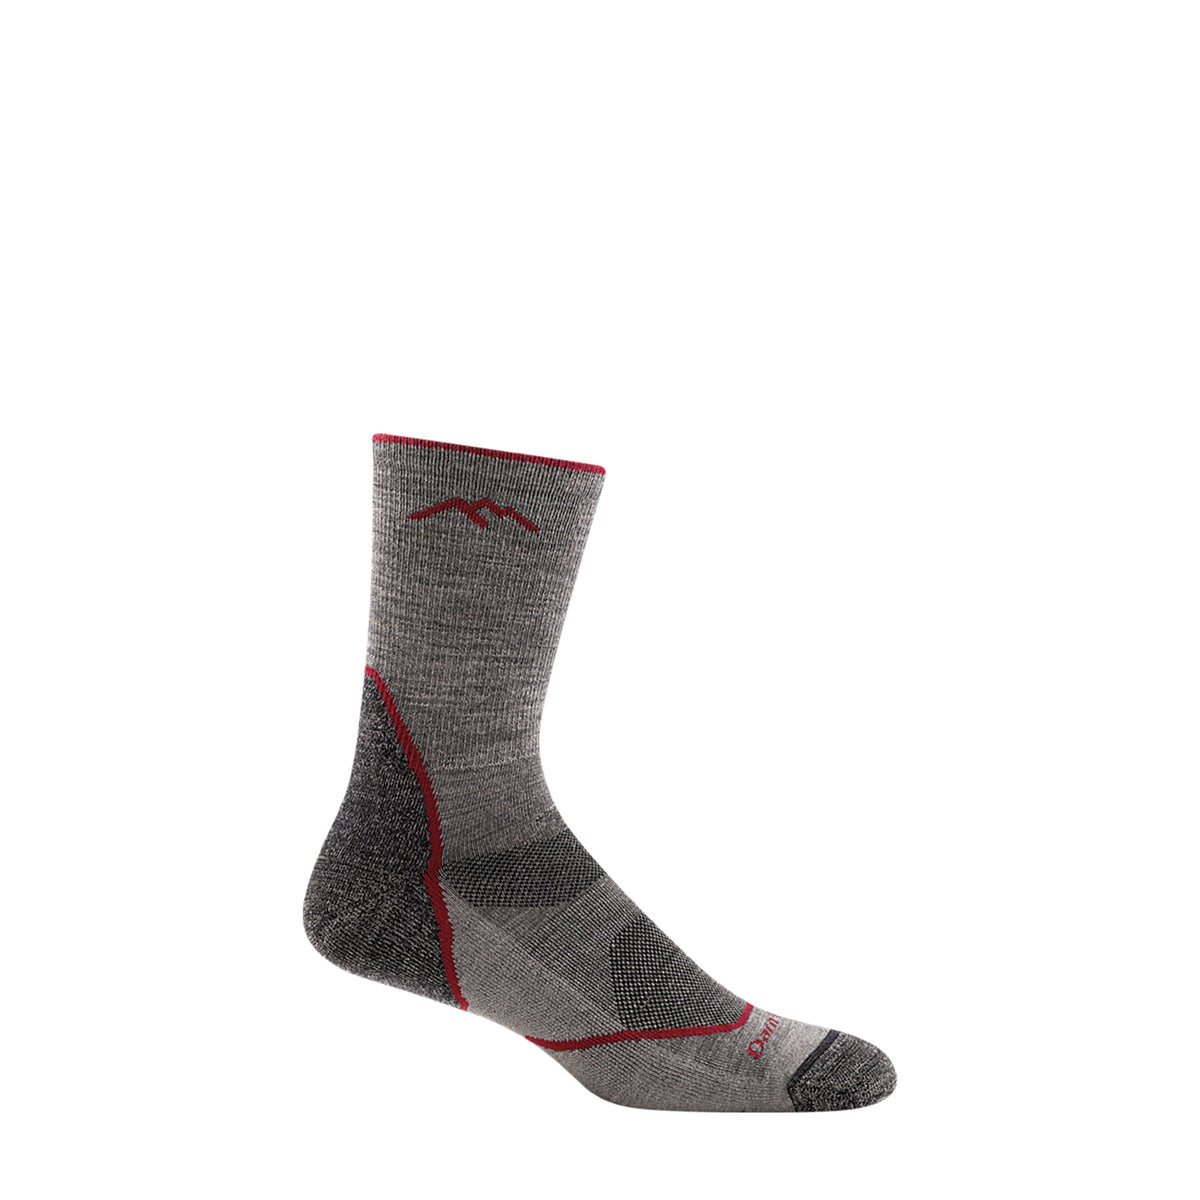 Image features the Darn Tough Light Hiker Micro Crew sock light grey with red trim and dark grey heel and toe patches.